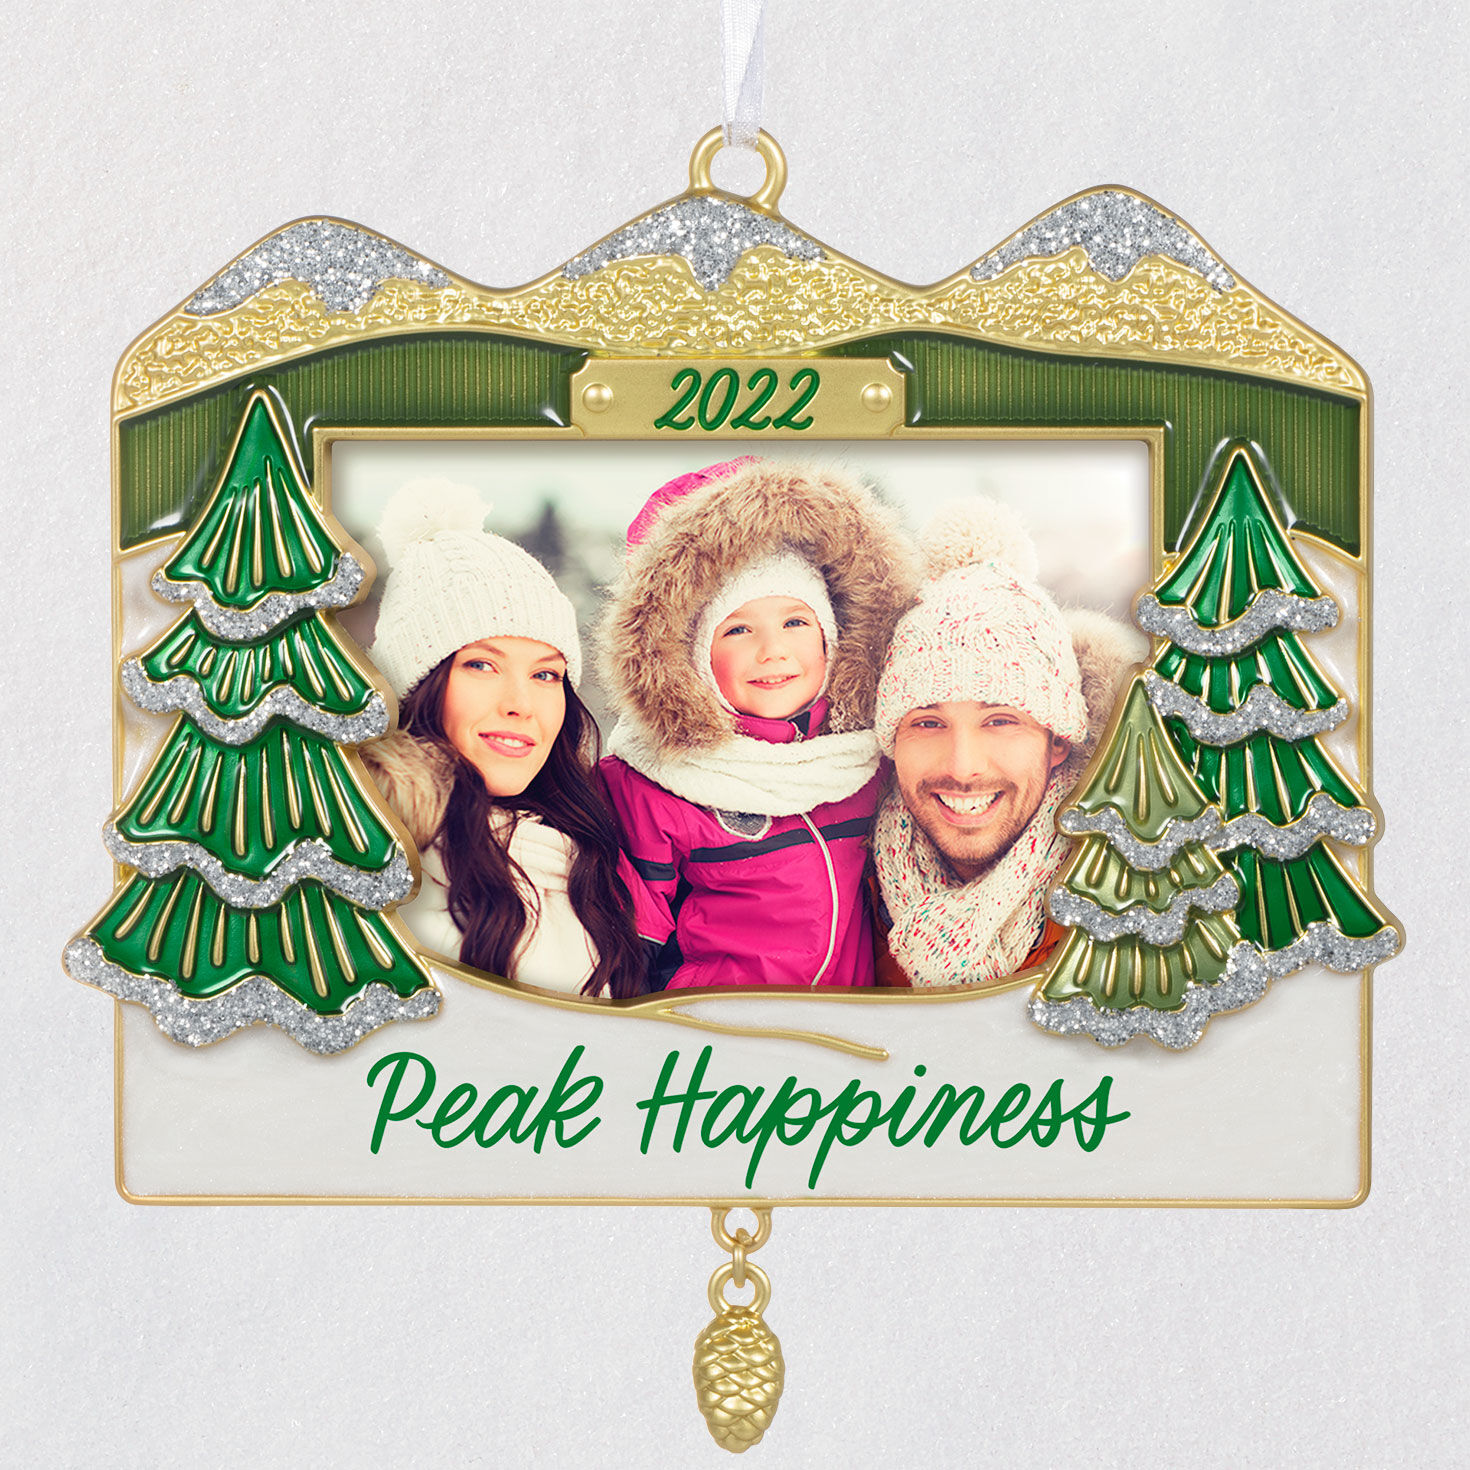 Family Picture Frame, Hallmark Mahogany Christmas Ornament 2018 Year Dated 